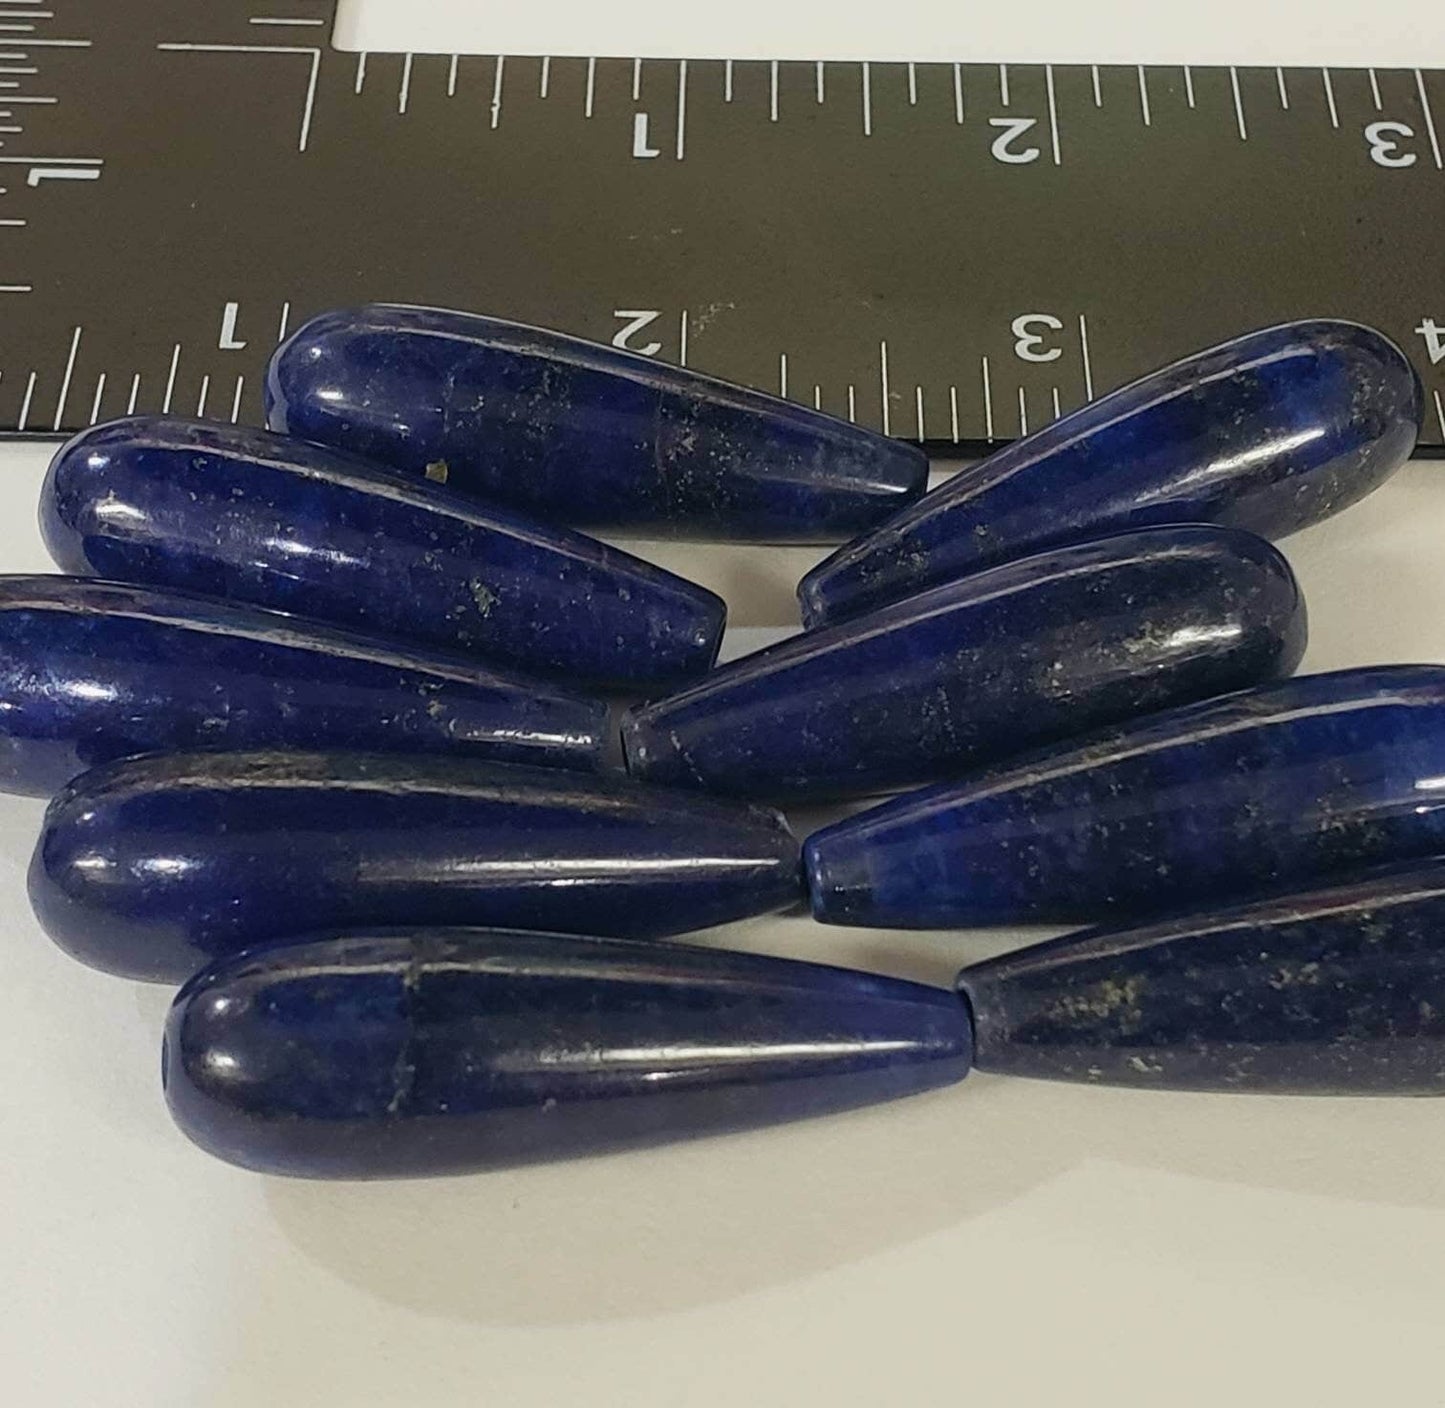 Genuine Lapis Lazuli AA heavy weight 10x39mm long tear drop bead for earrings or pendant making bead, top to bottom drilled.